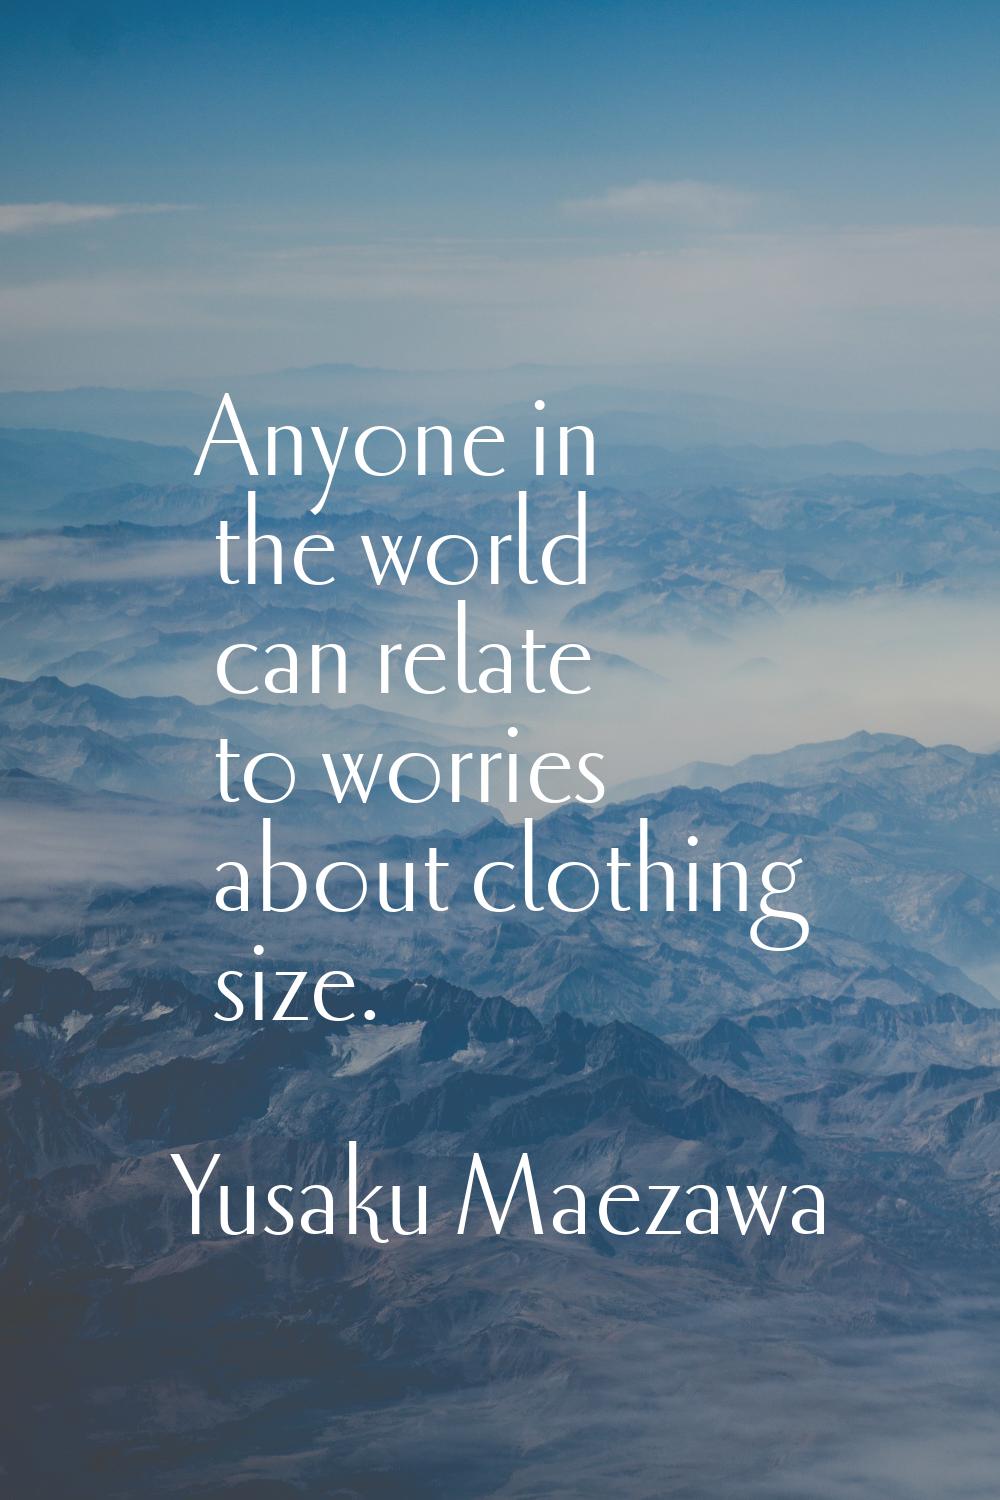 Anyone in the world can relate to worries about clothing size.